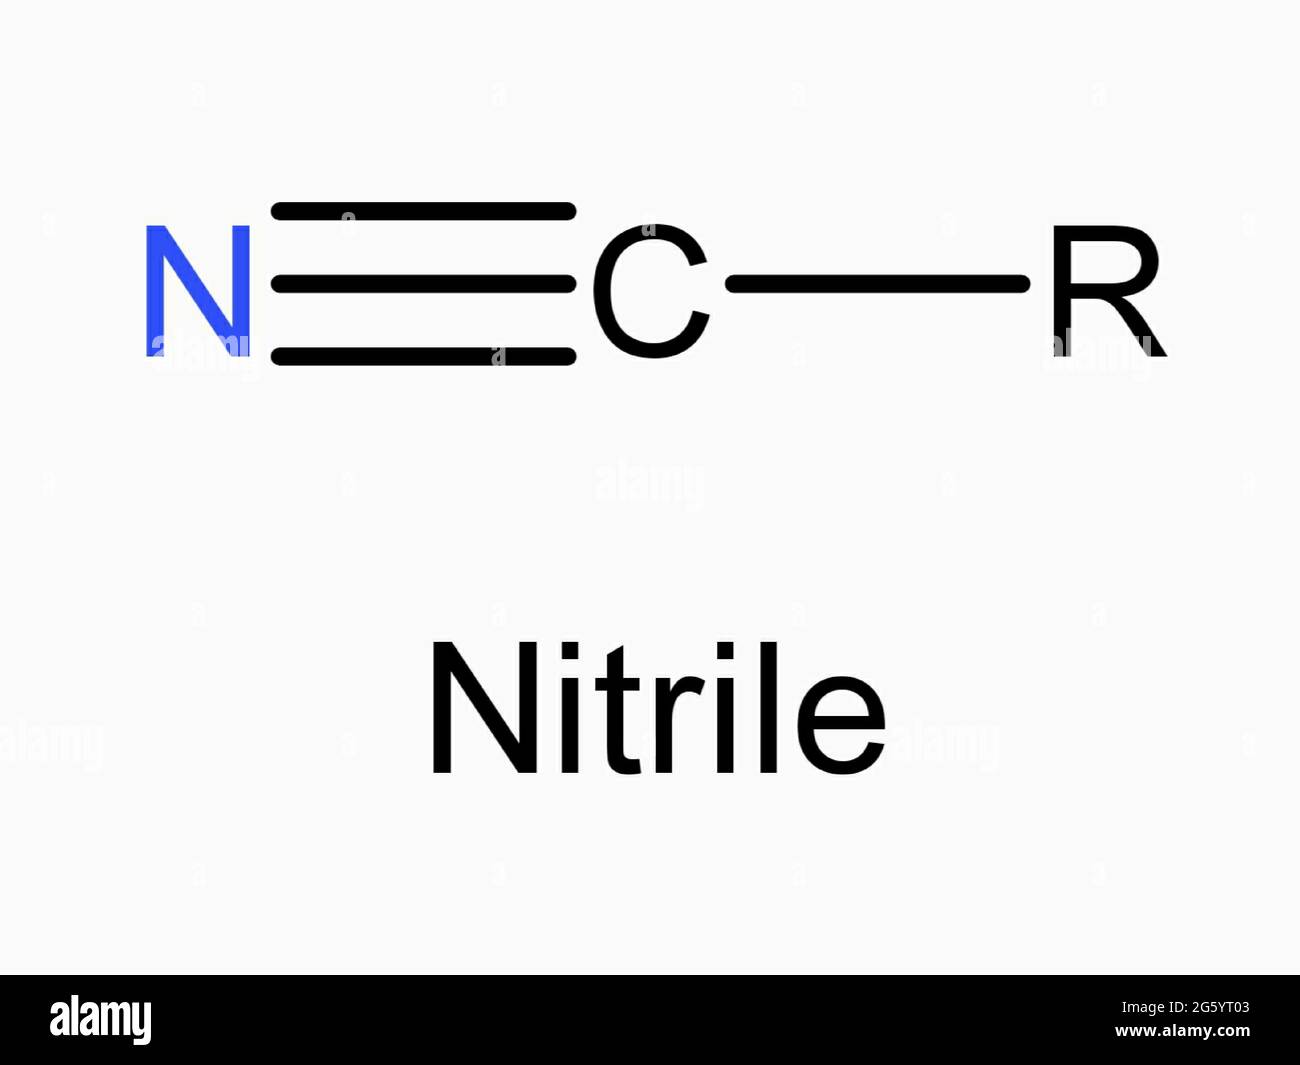 nitrile functional group molecule atom formula isolated on white background organic chemistry molecular structure RNC Cyano Compound Stock Photo